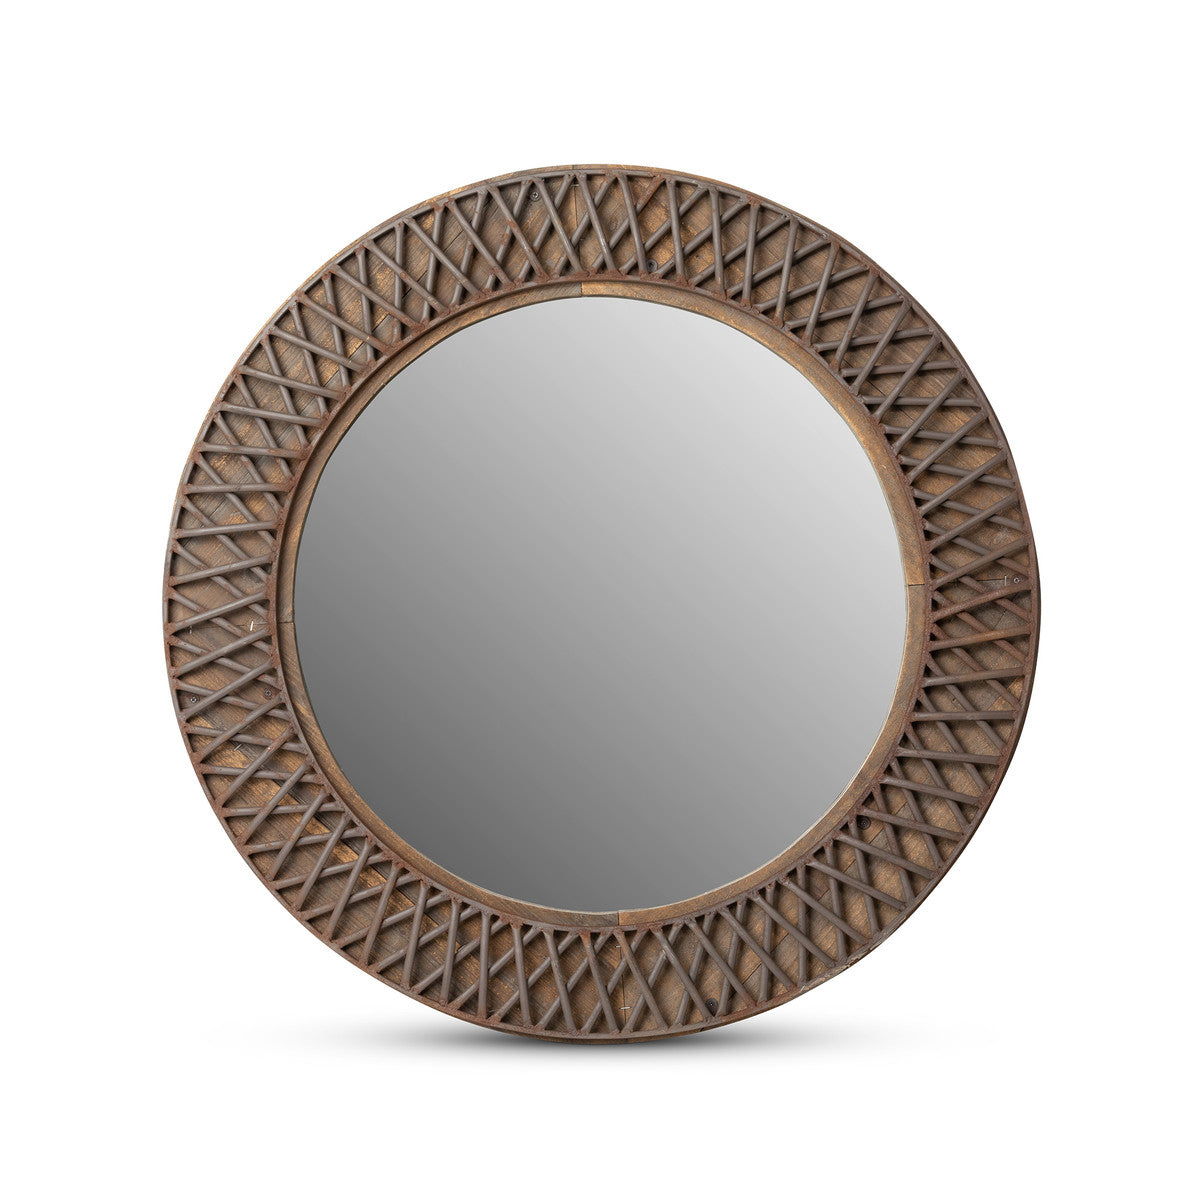 Park Hill - Ogee Mirror, Small